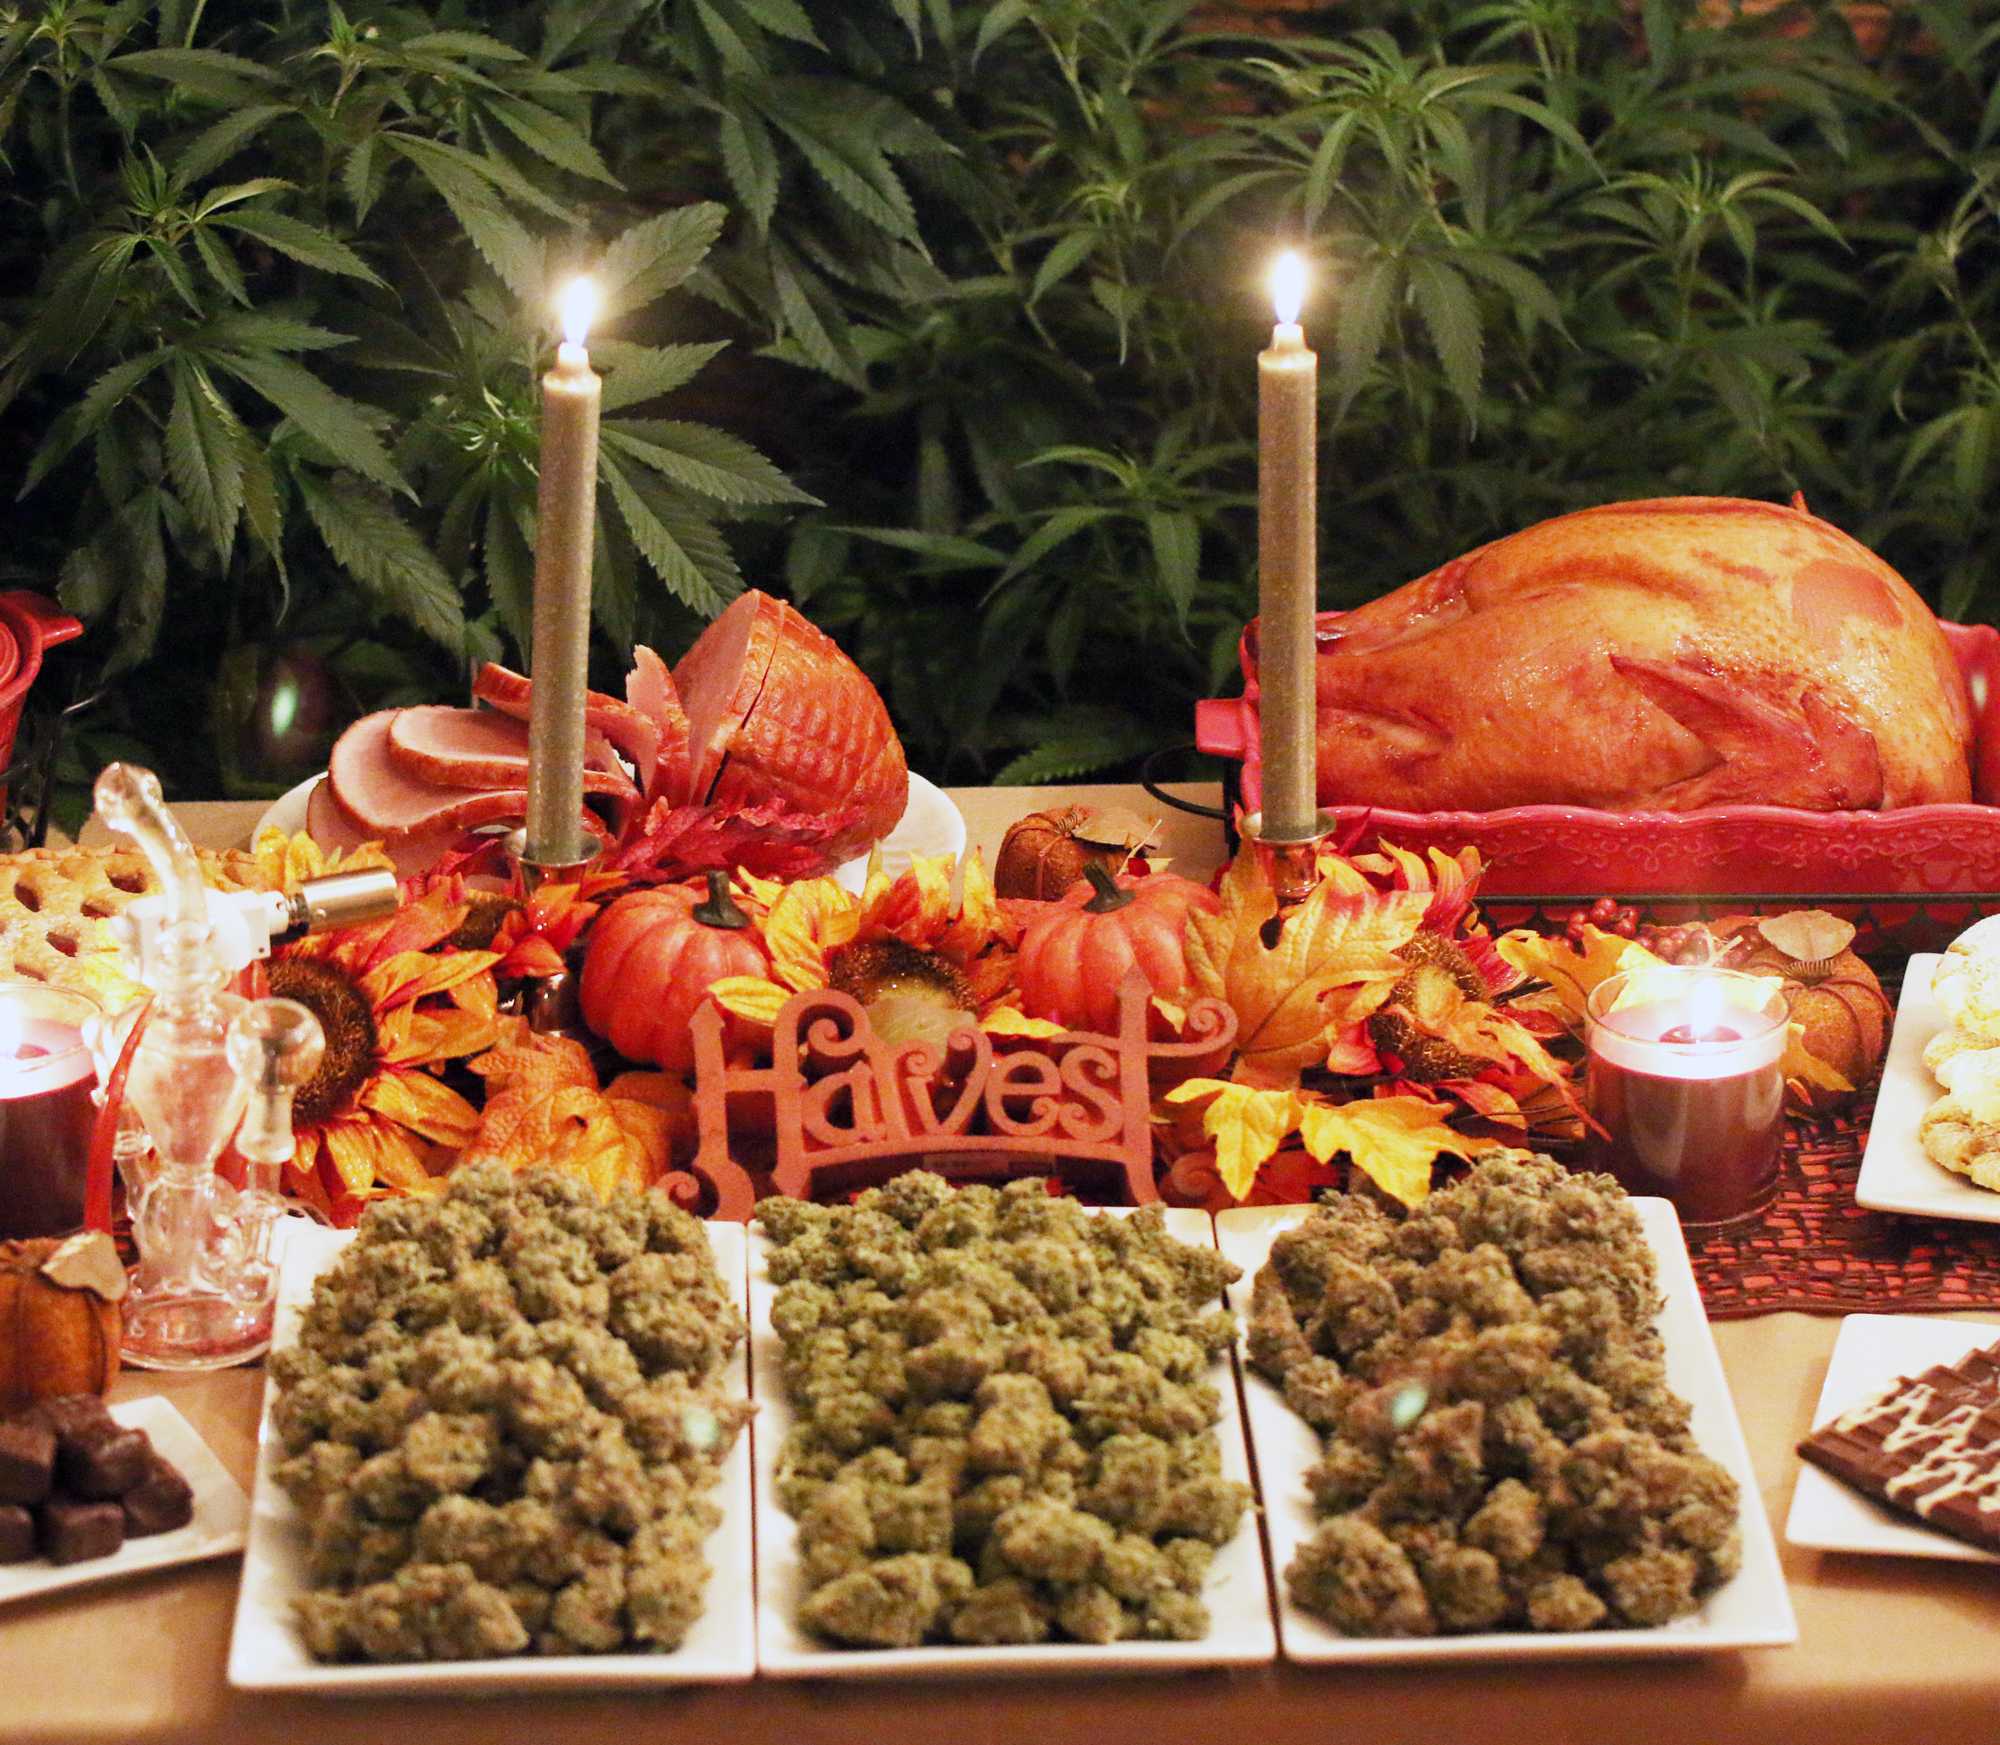 Happy Danksgiving! Store closed for Thanksgiving Day